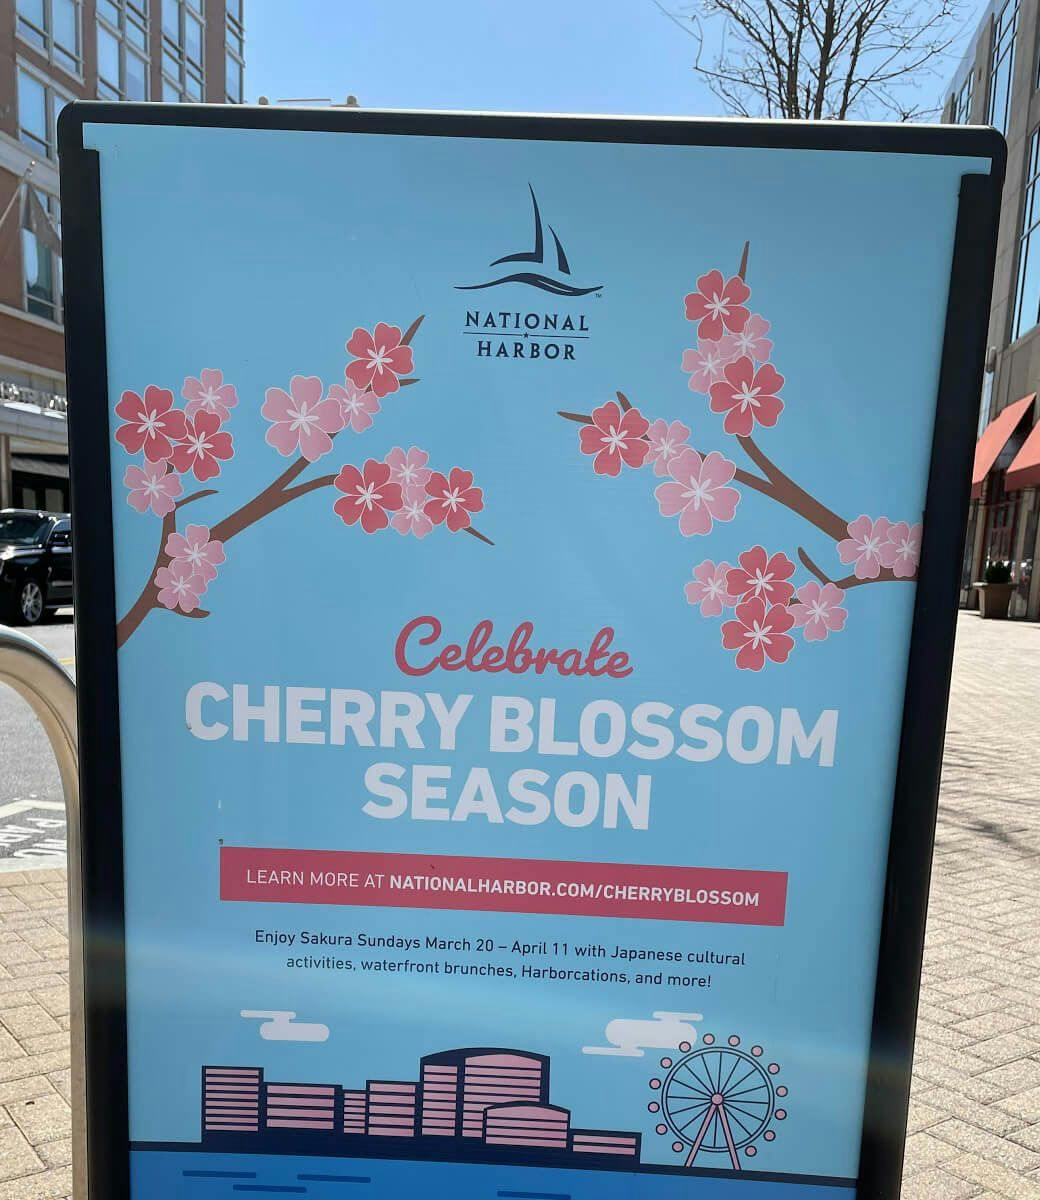 The sign of The Cherry Blossom Festival